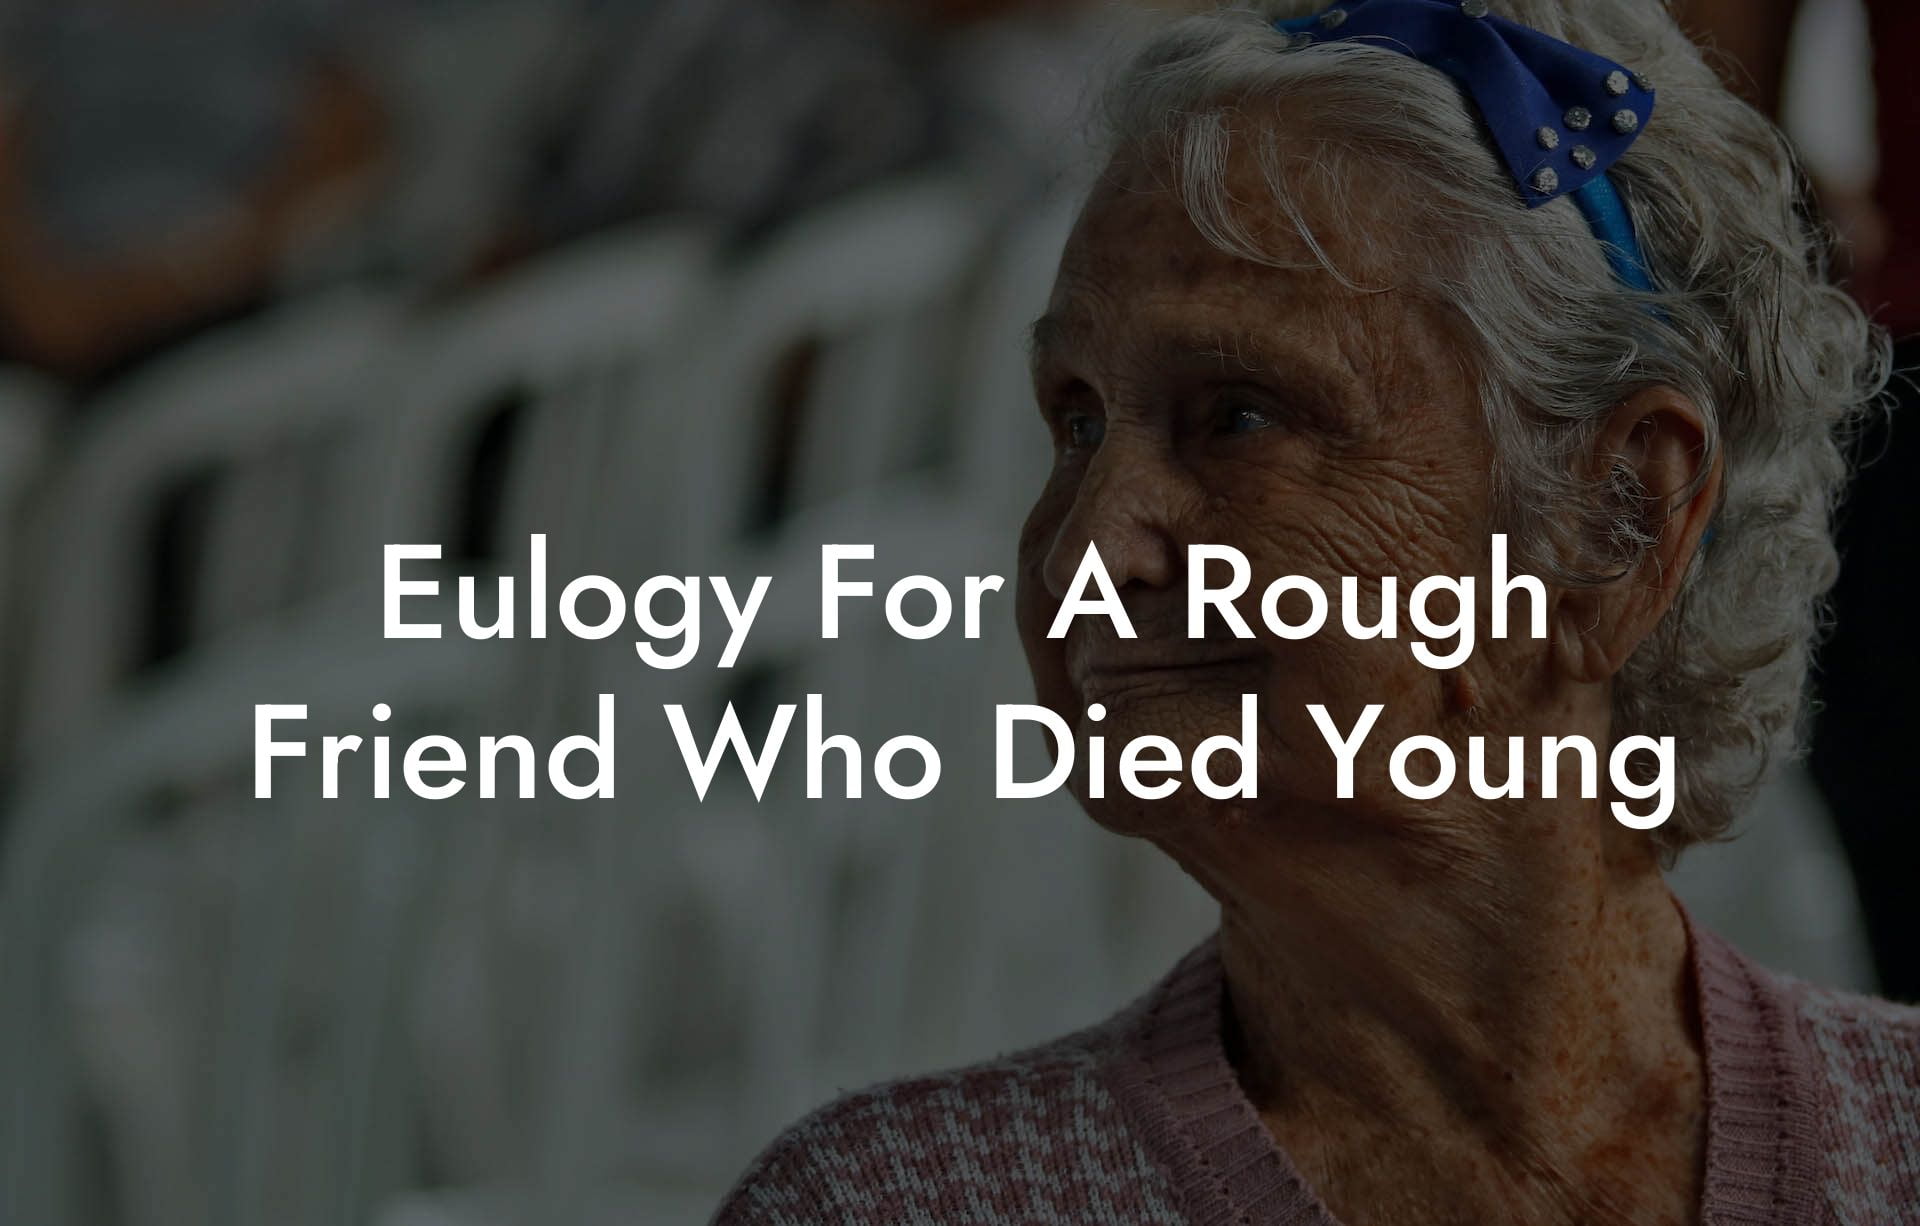 Eulogy For A Rough Friend Who Died Young